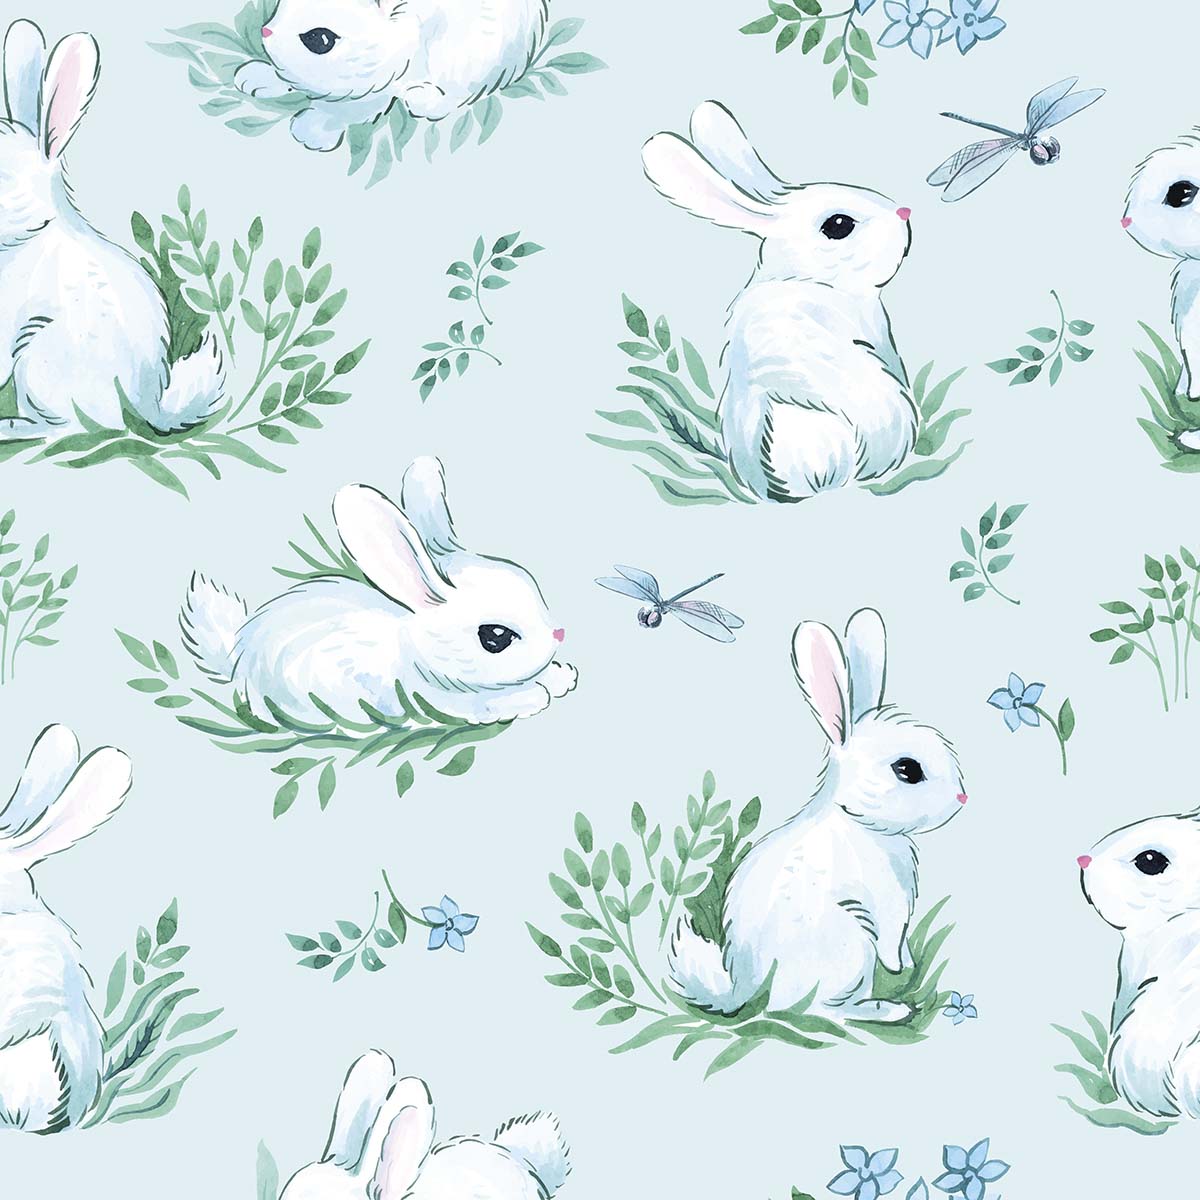 A pattern of white bunnies and flowers